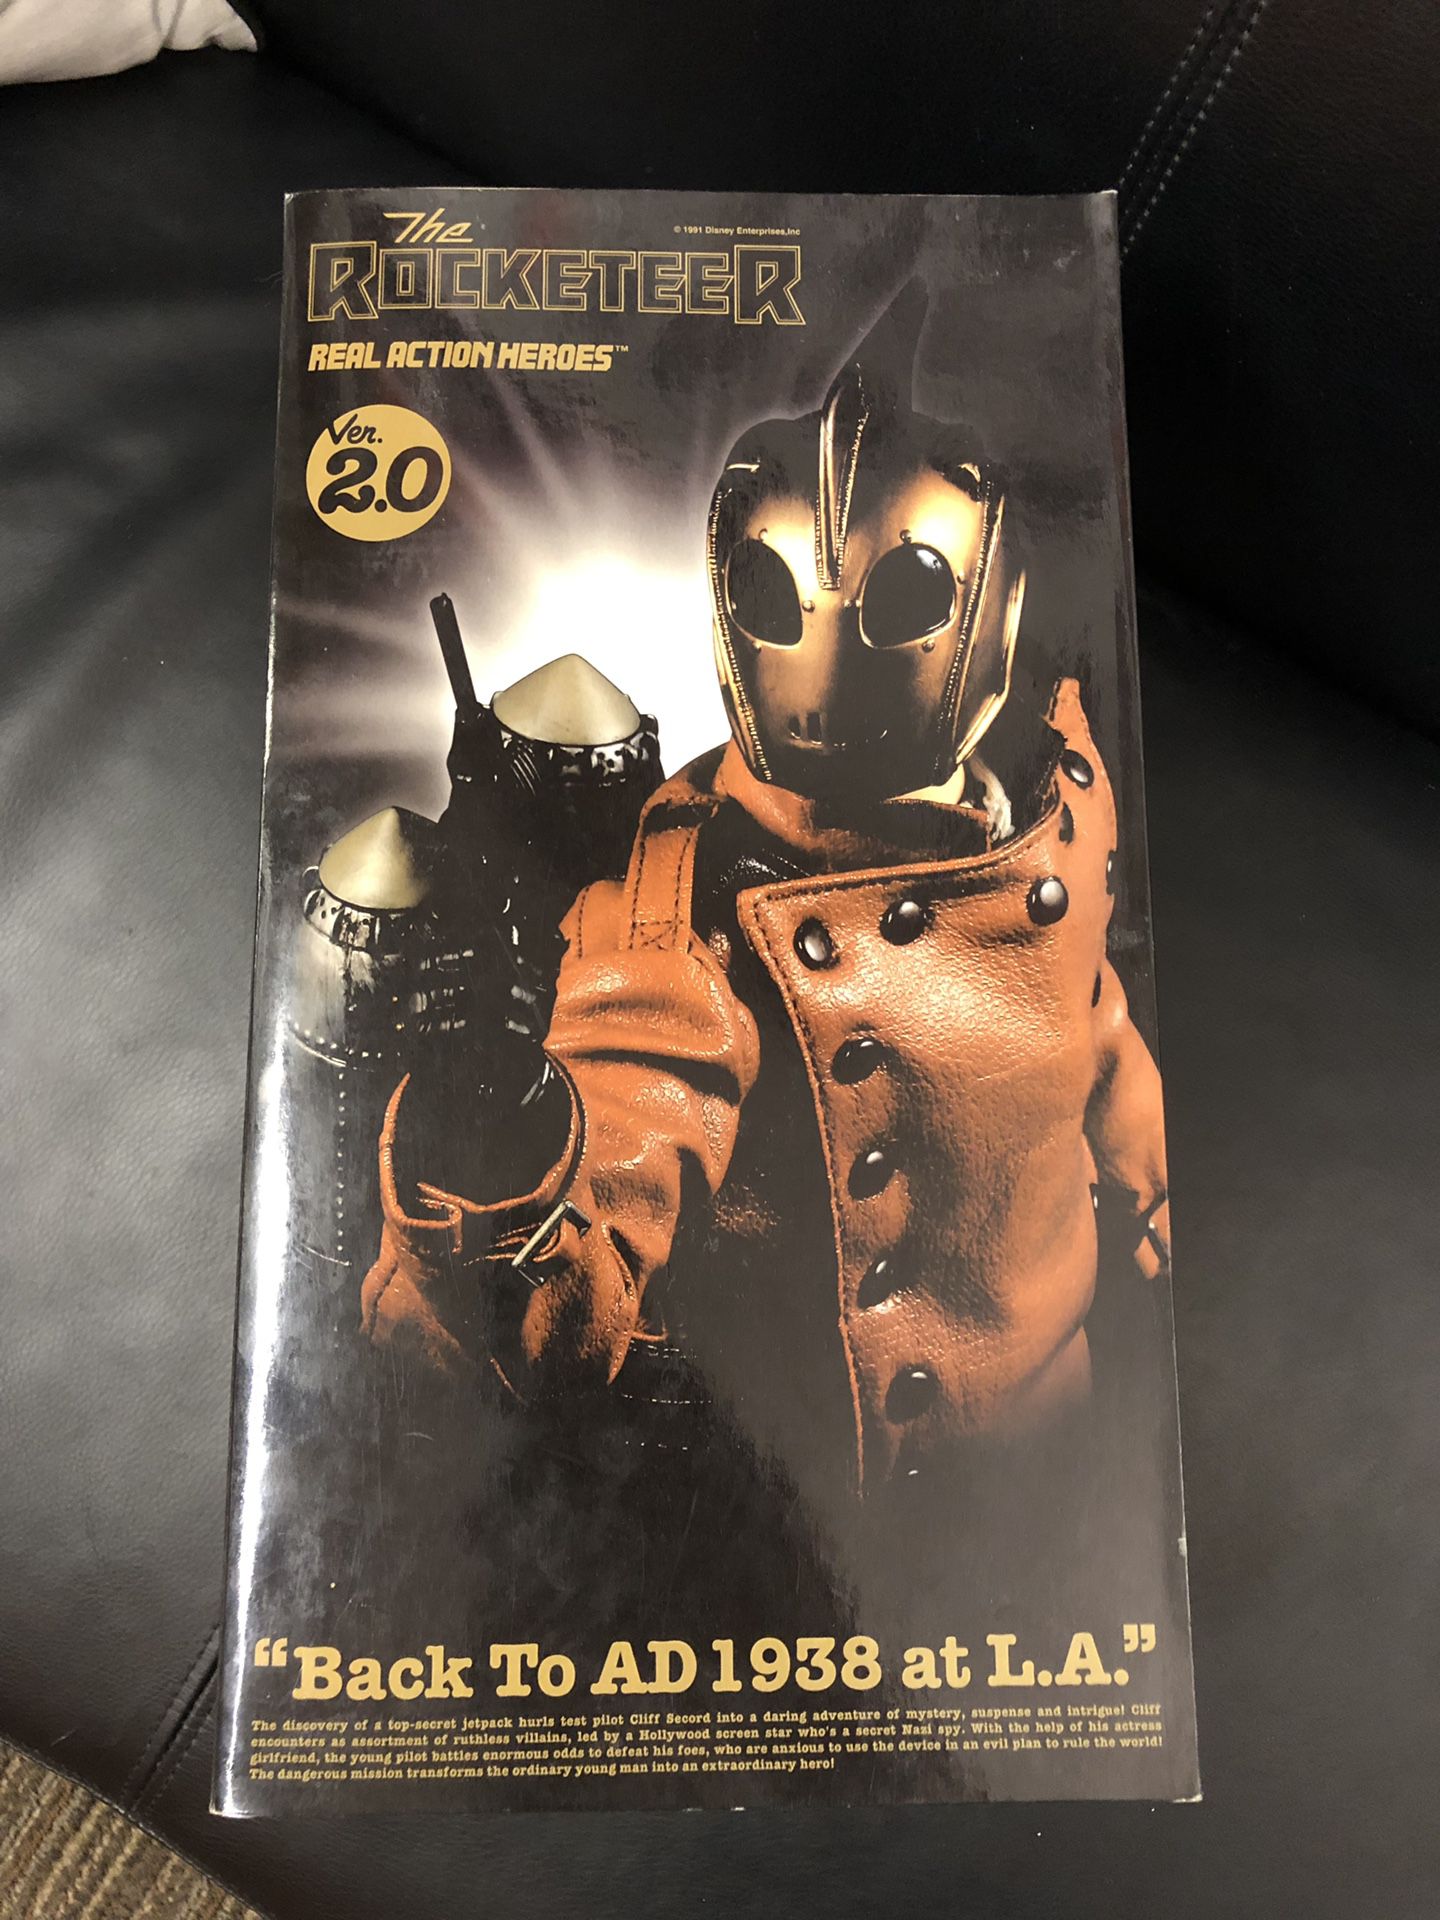 Medicom Toy Corp. Rocketeer Real Action Heroes Ver. 2.0 12" Action Figure.